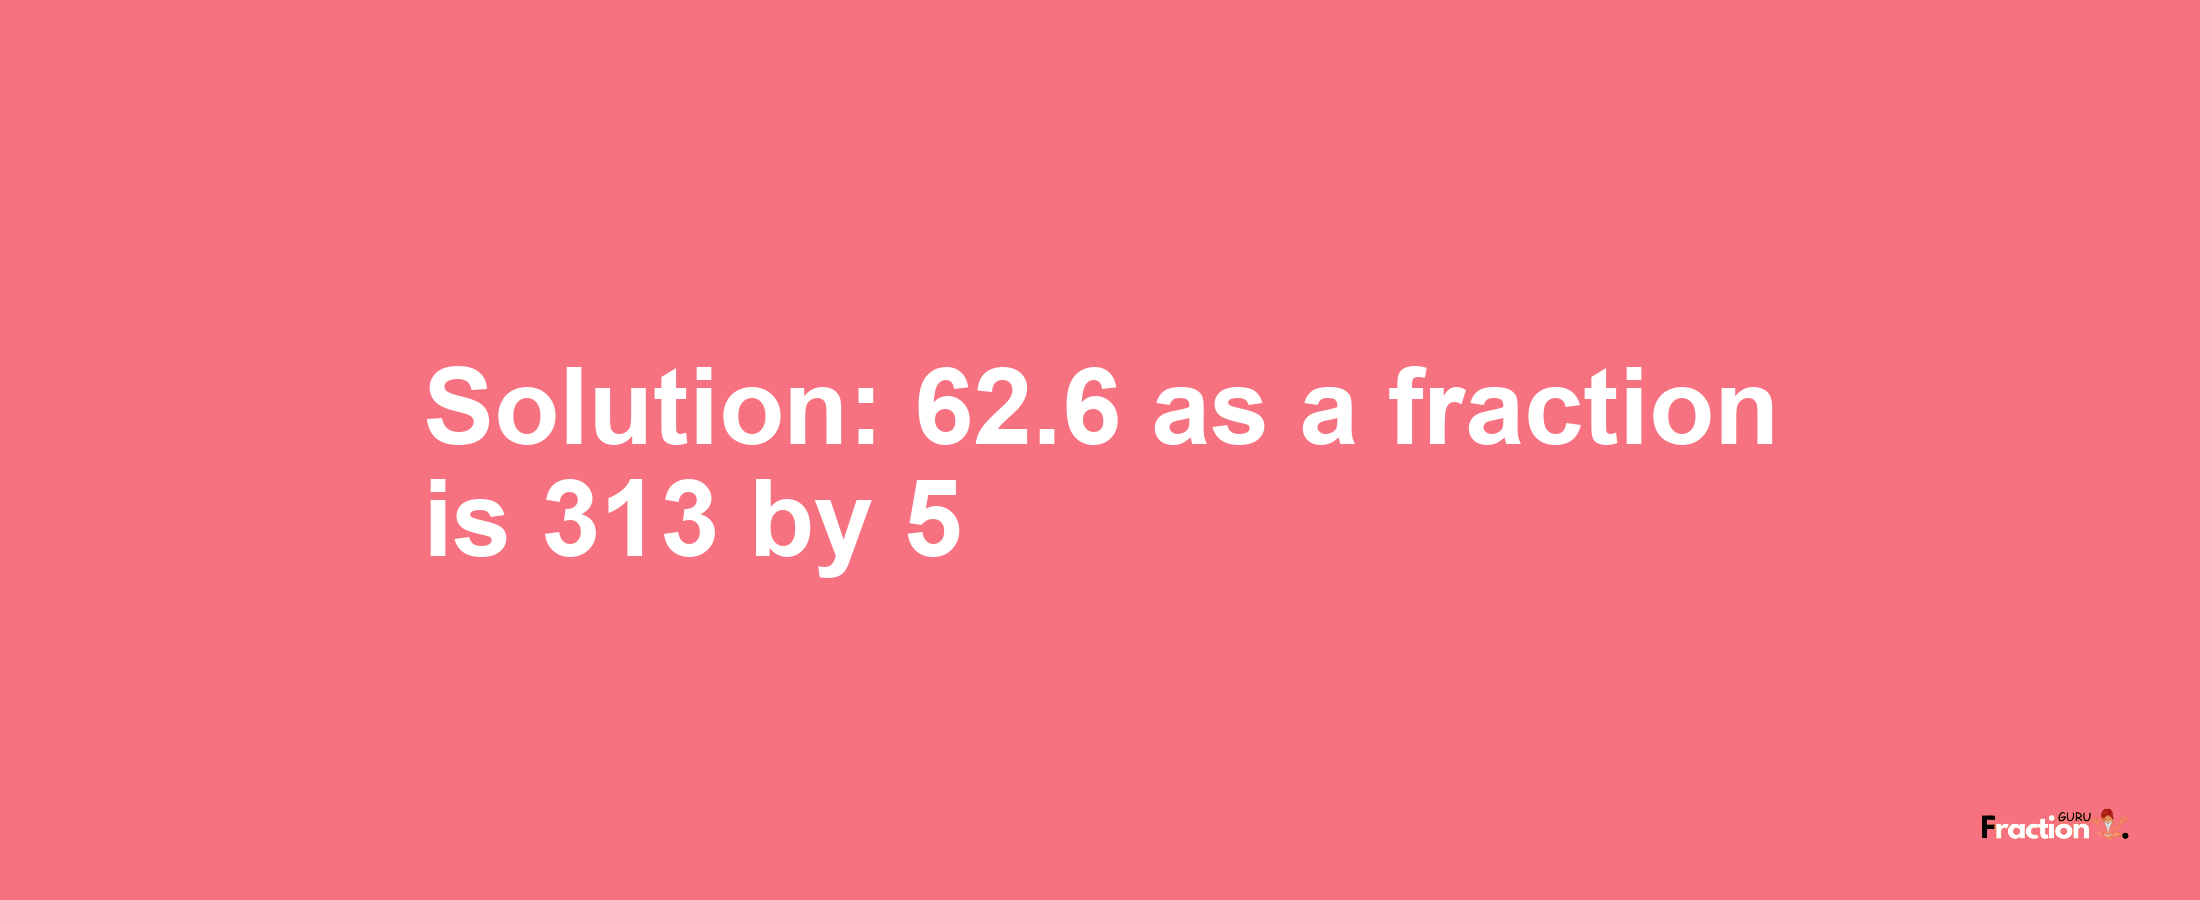 Solution:62.6 as a fraction is 313/5